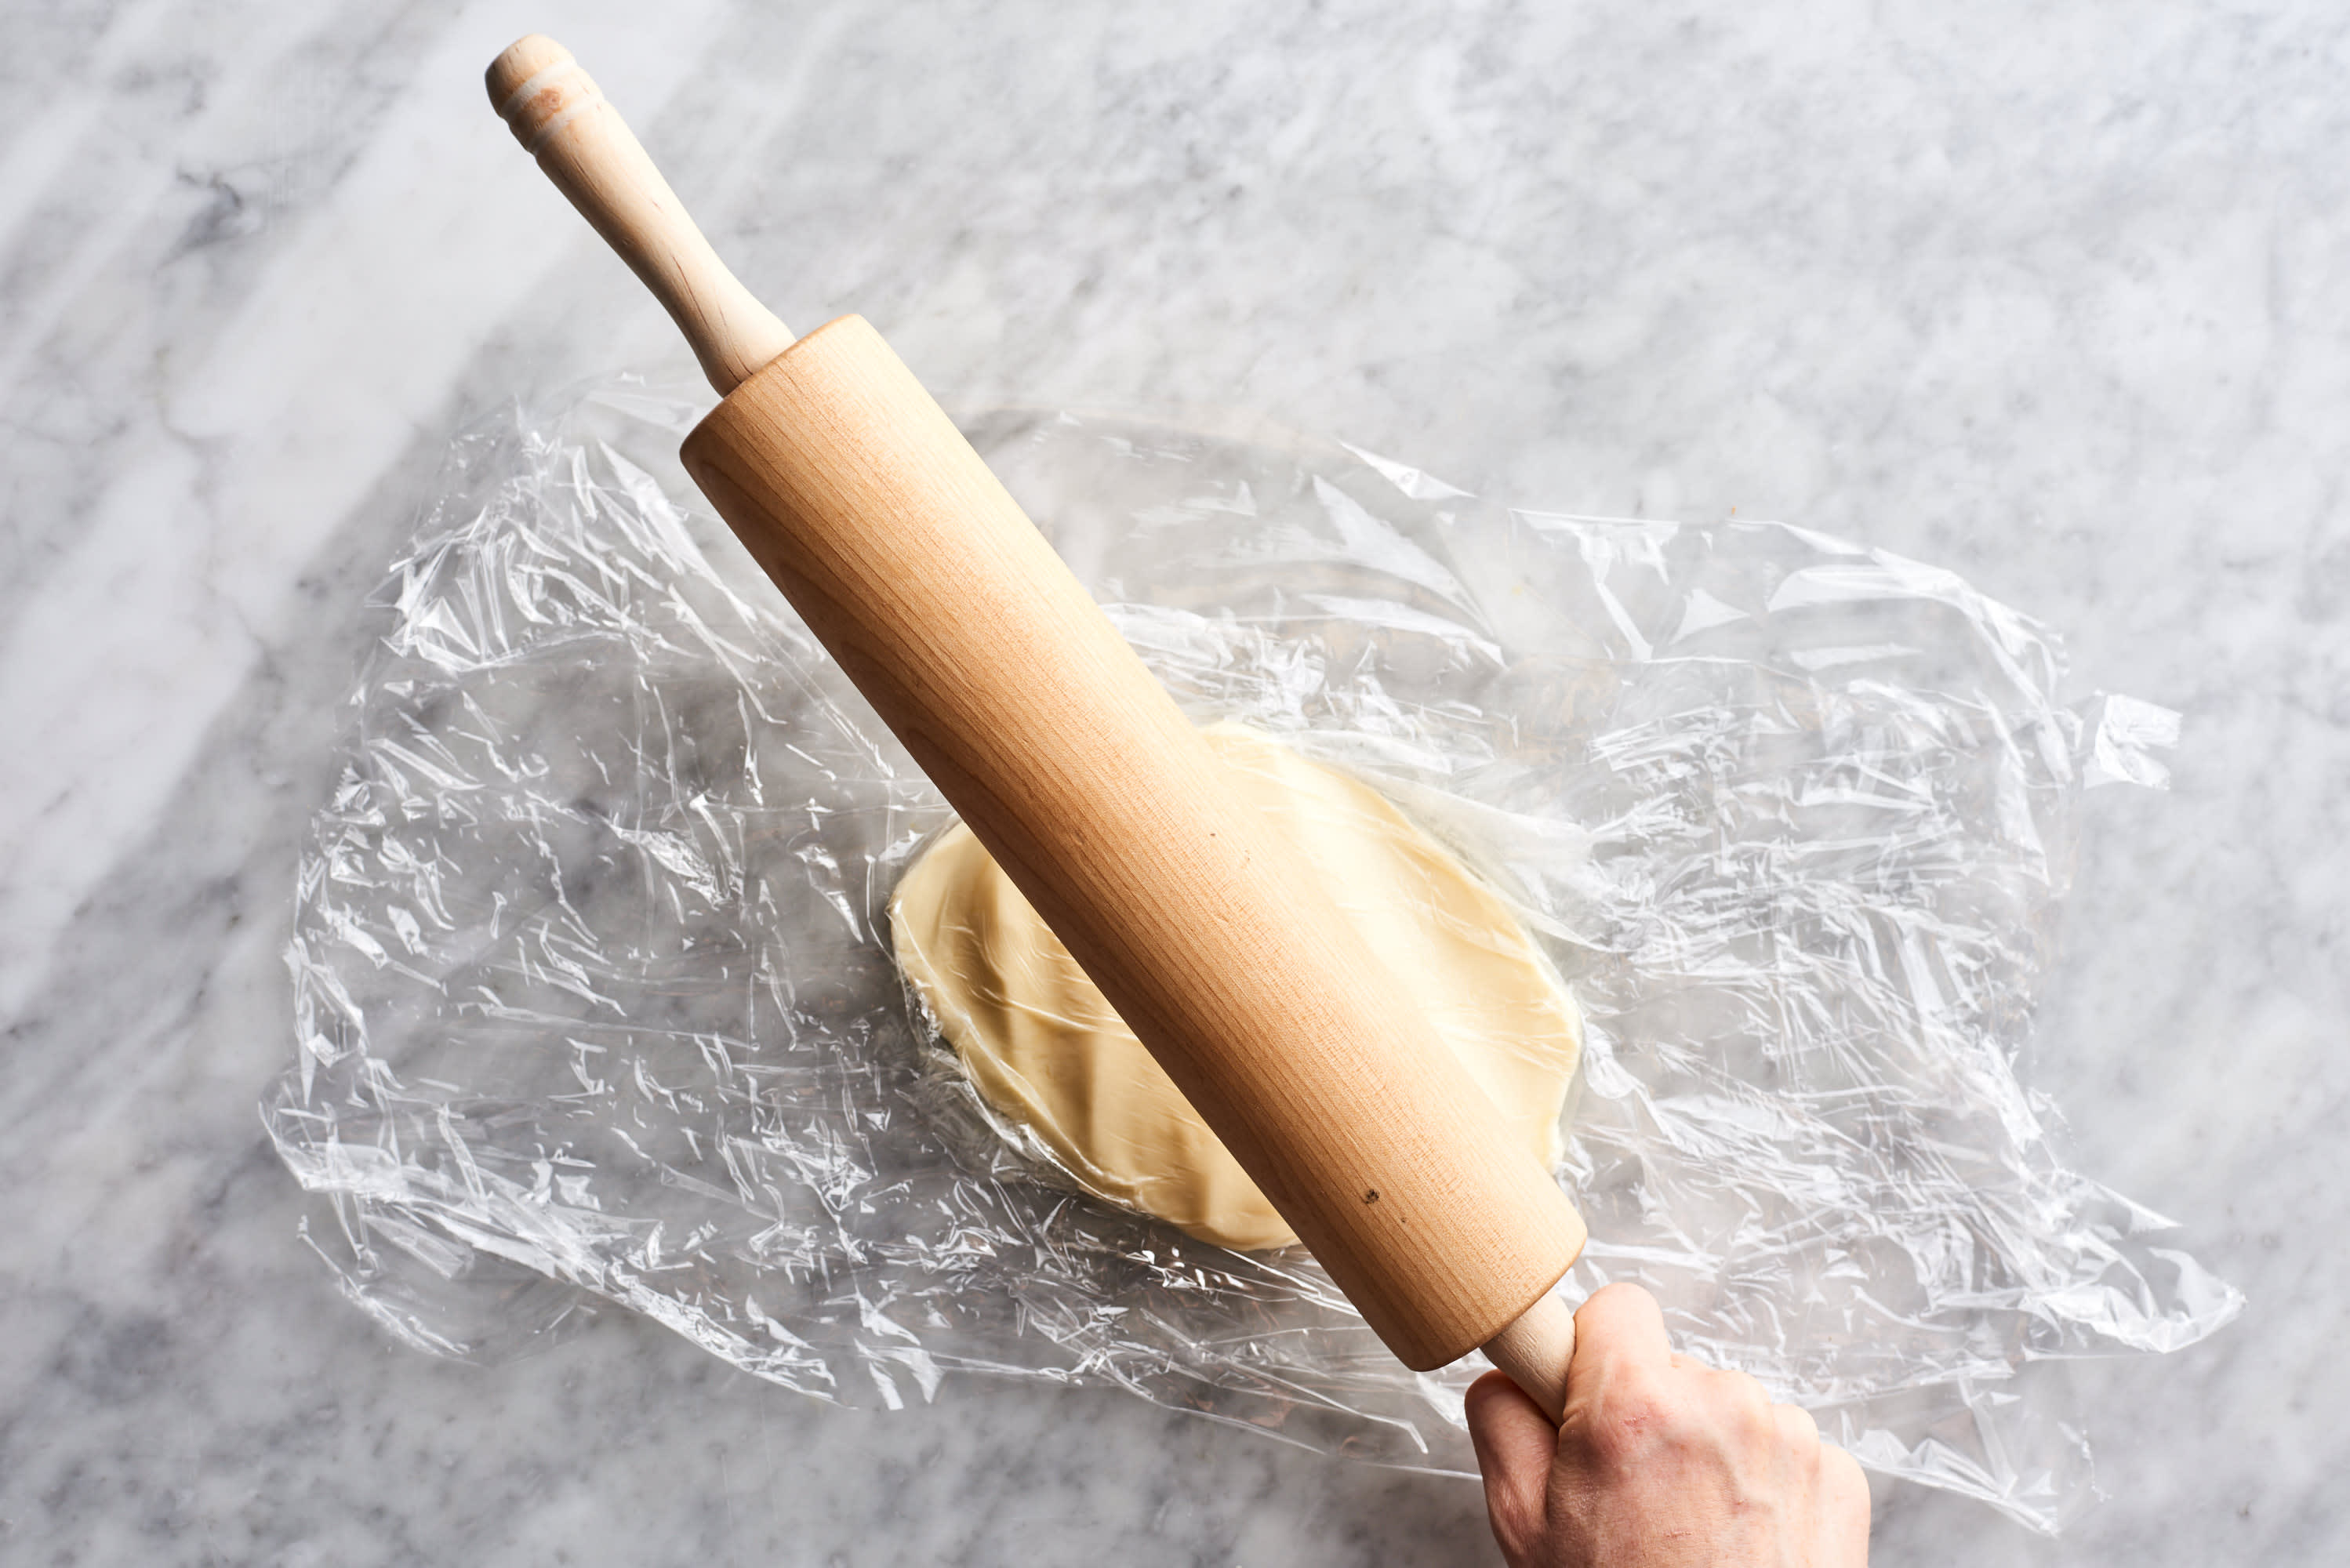 Must-Have Tools For the Home Baker